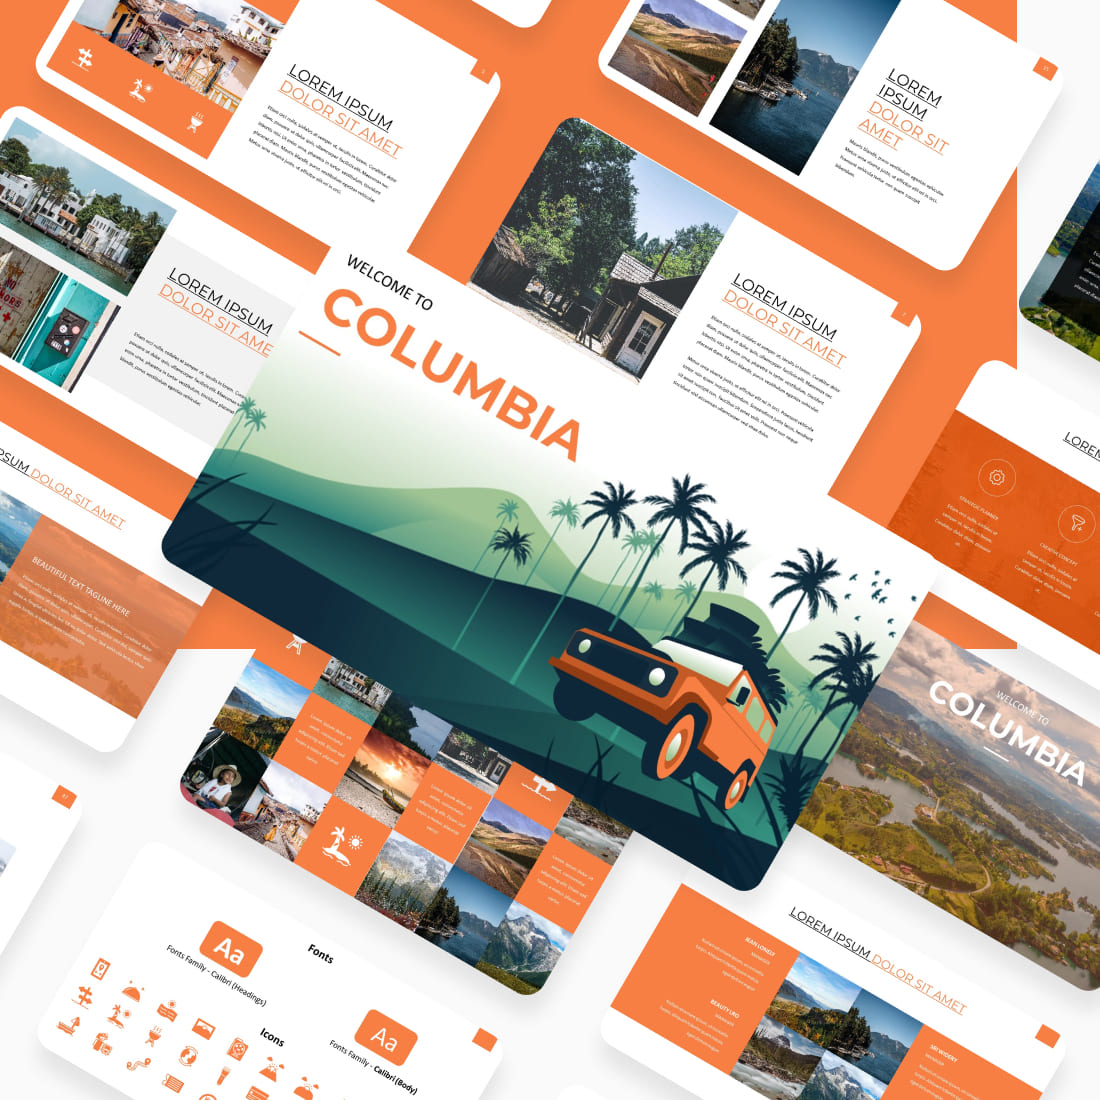 Сolombia Travel Keynote Template cover image,